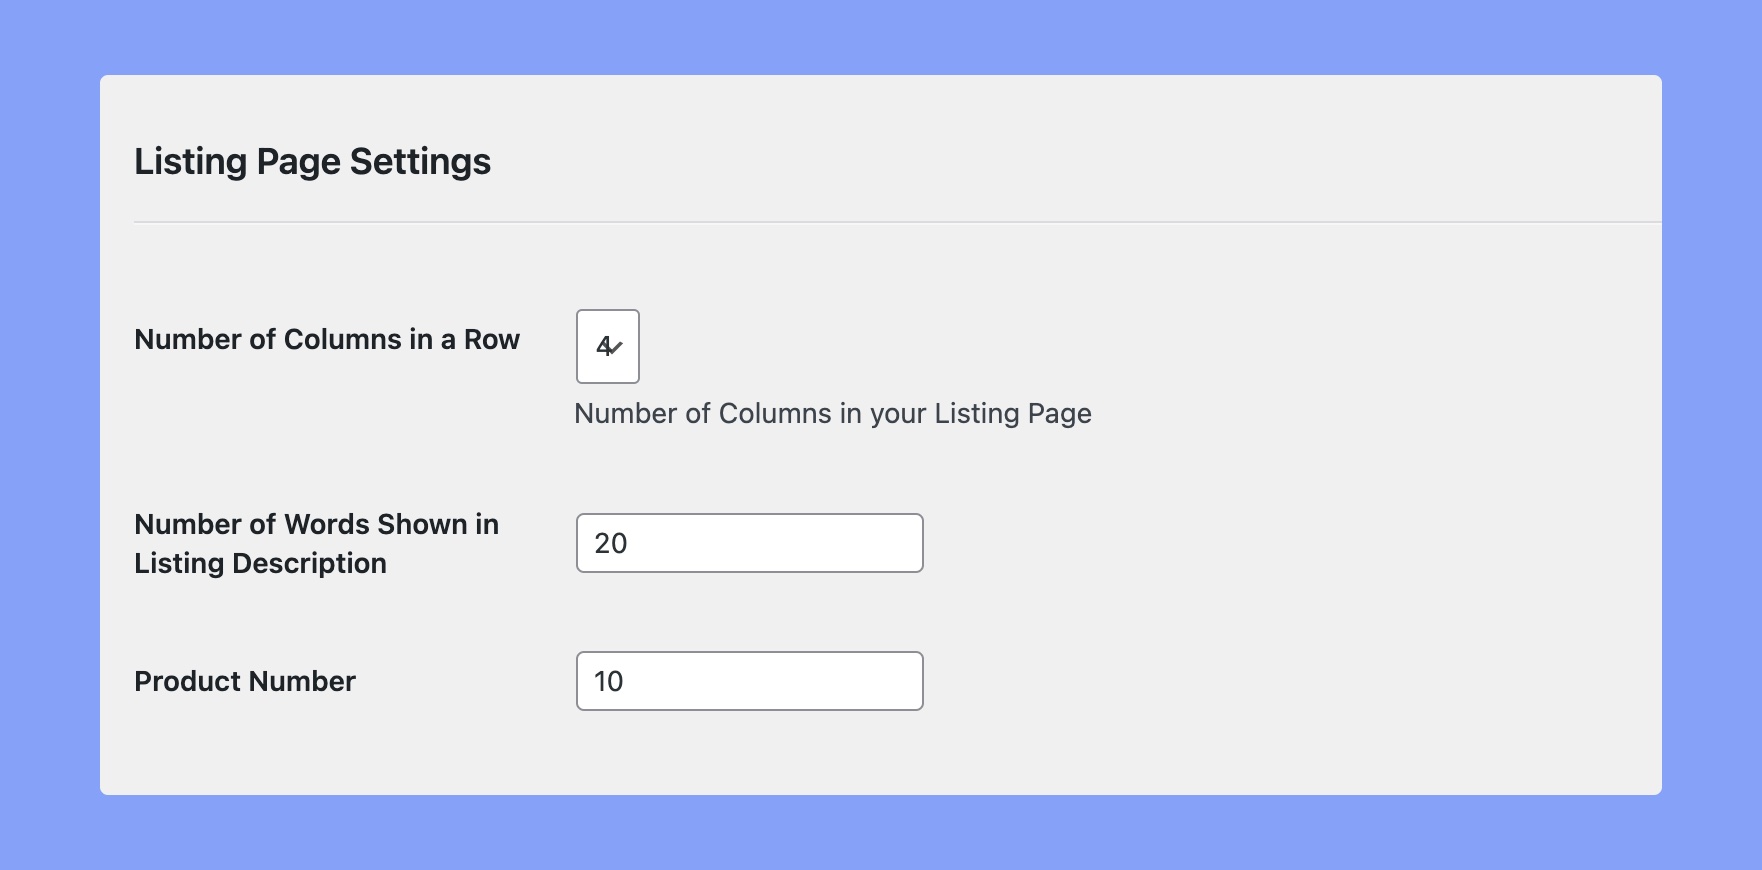 Listing page settings